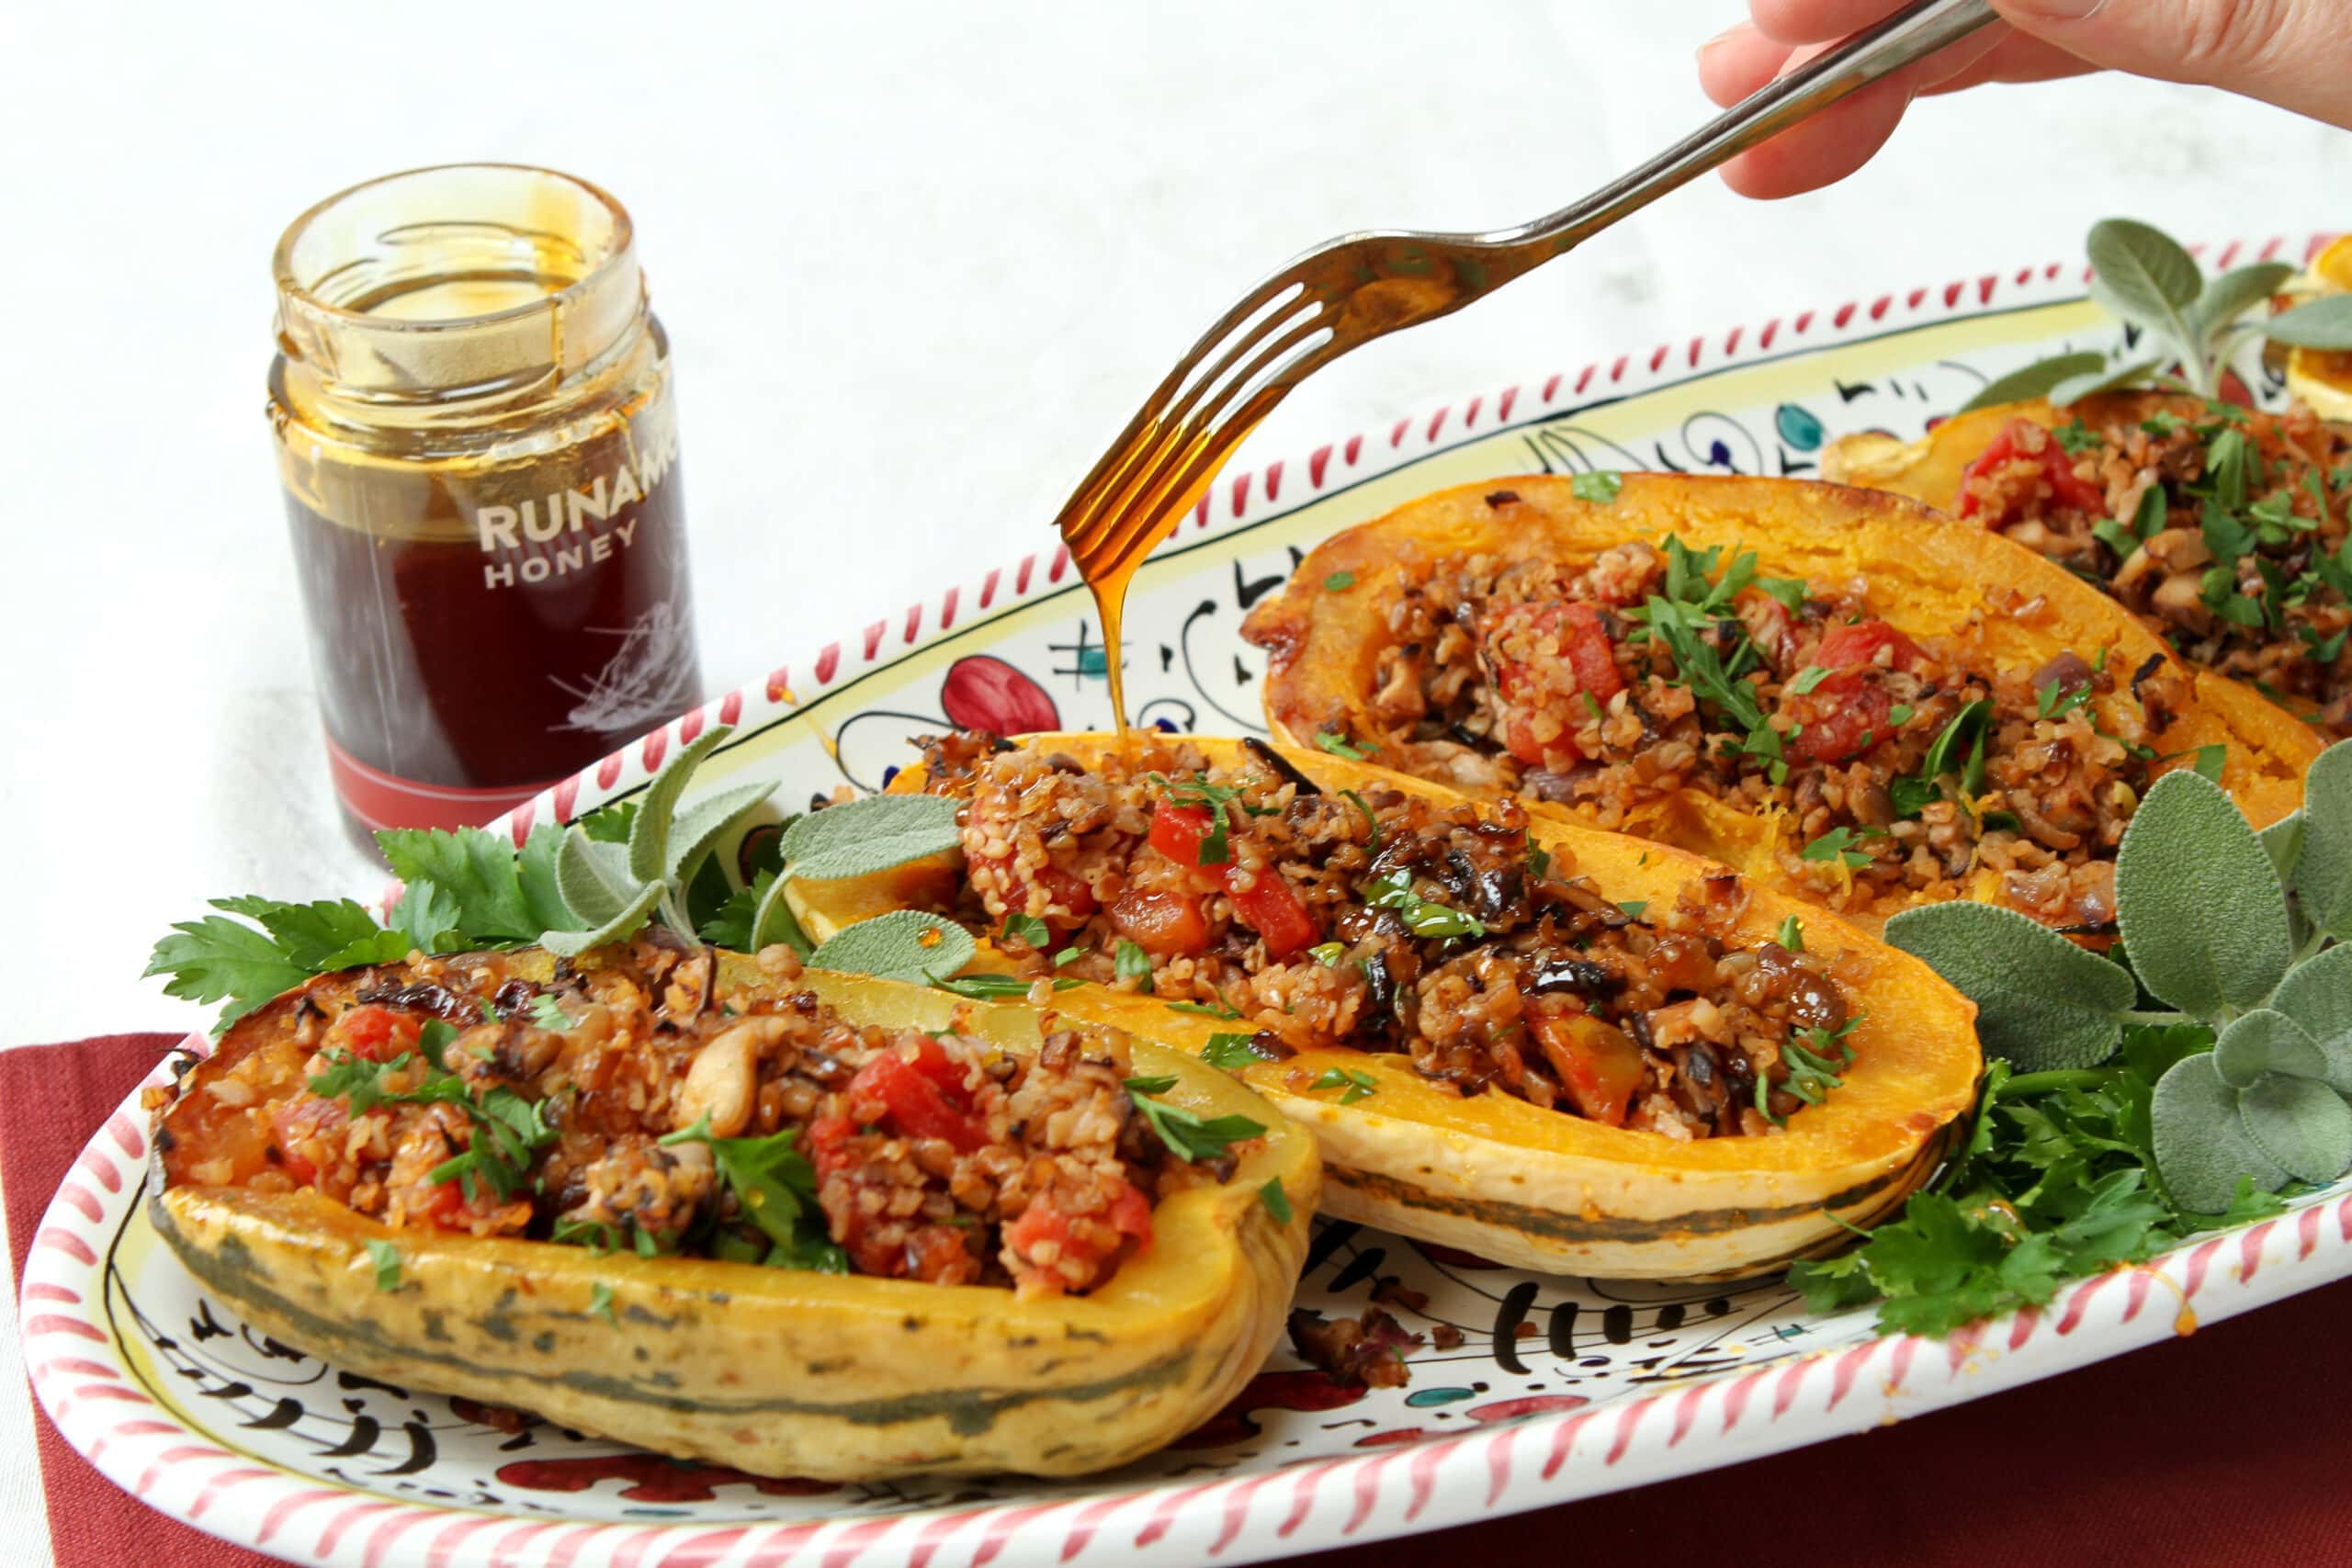 Roasted Delicatas Stuffed with Beef or Bulgur and Drizzled with Hot Honey